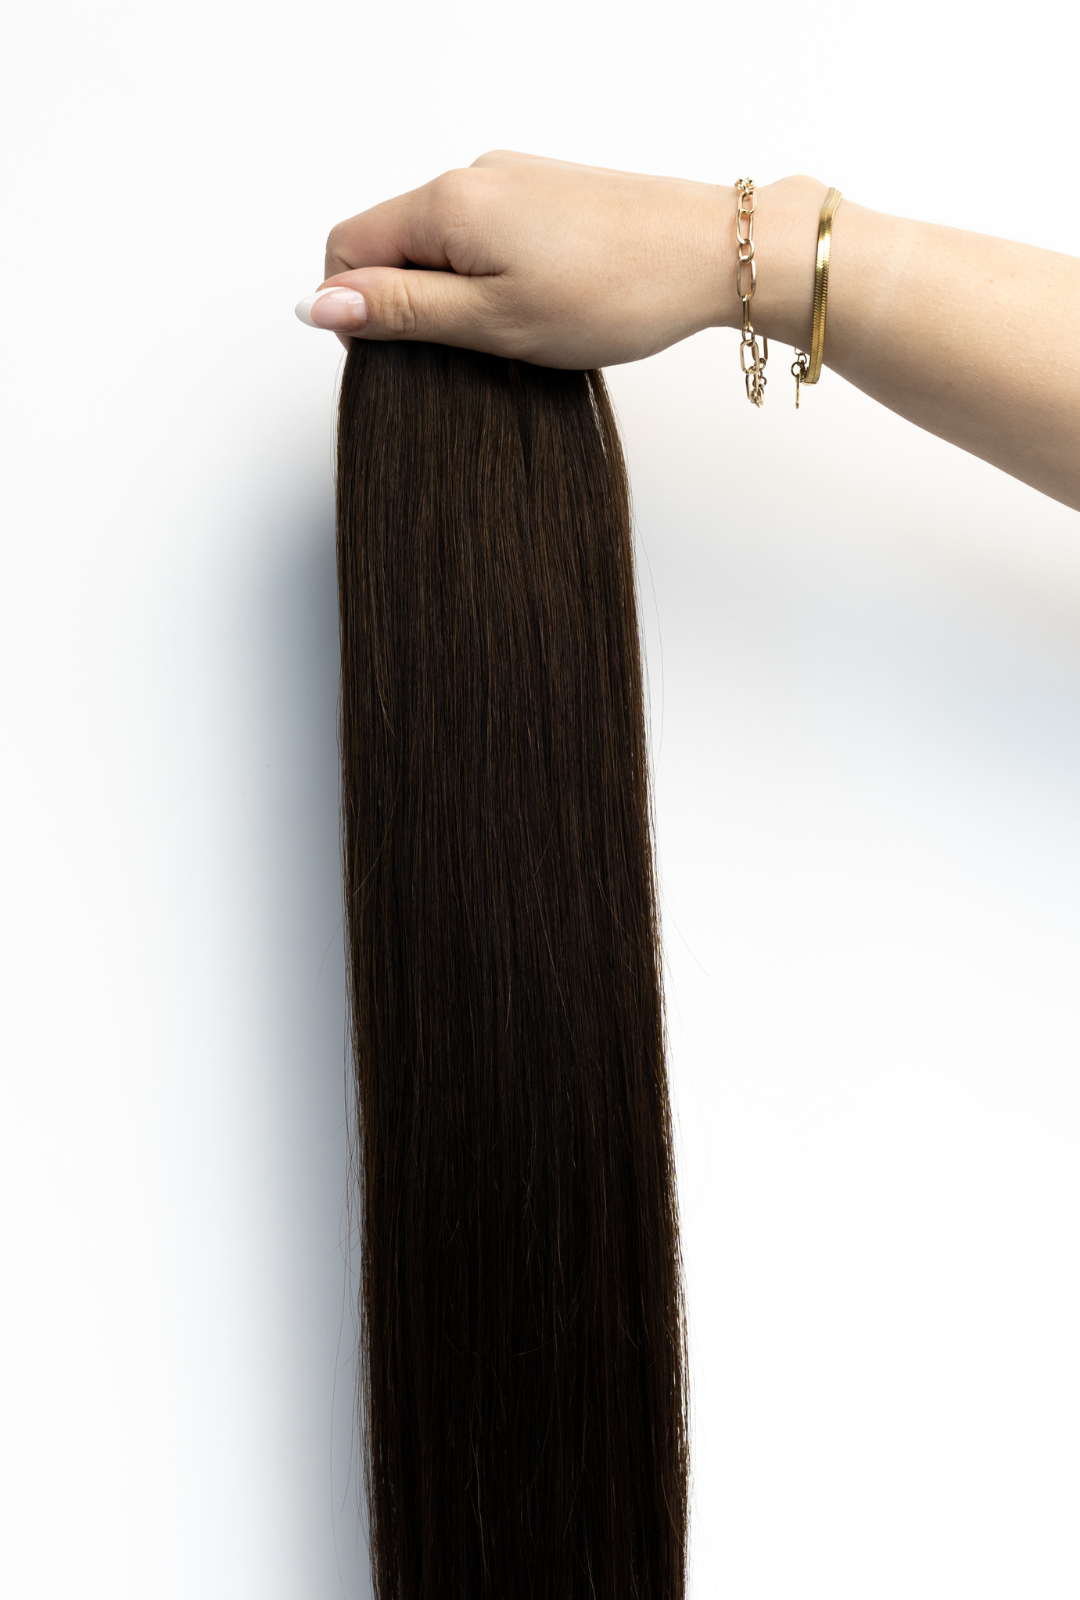 interLACED Weft Extensions #2 (Chocolate)